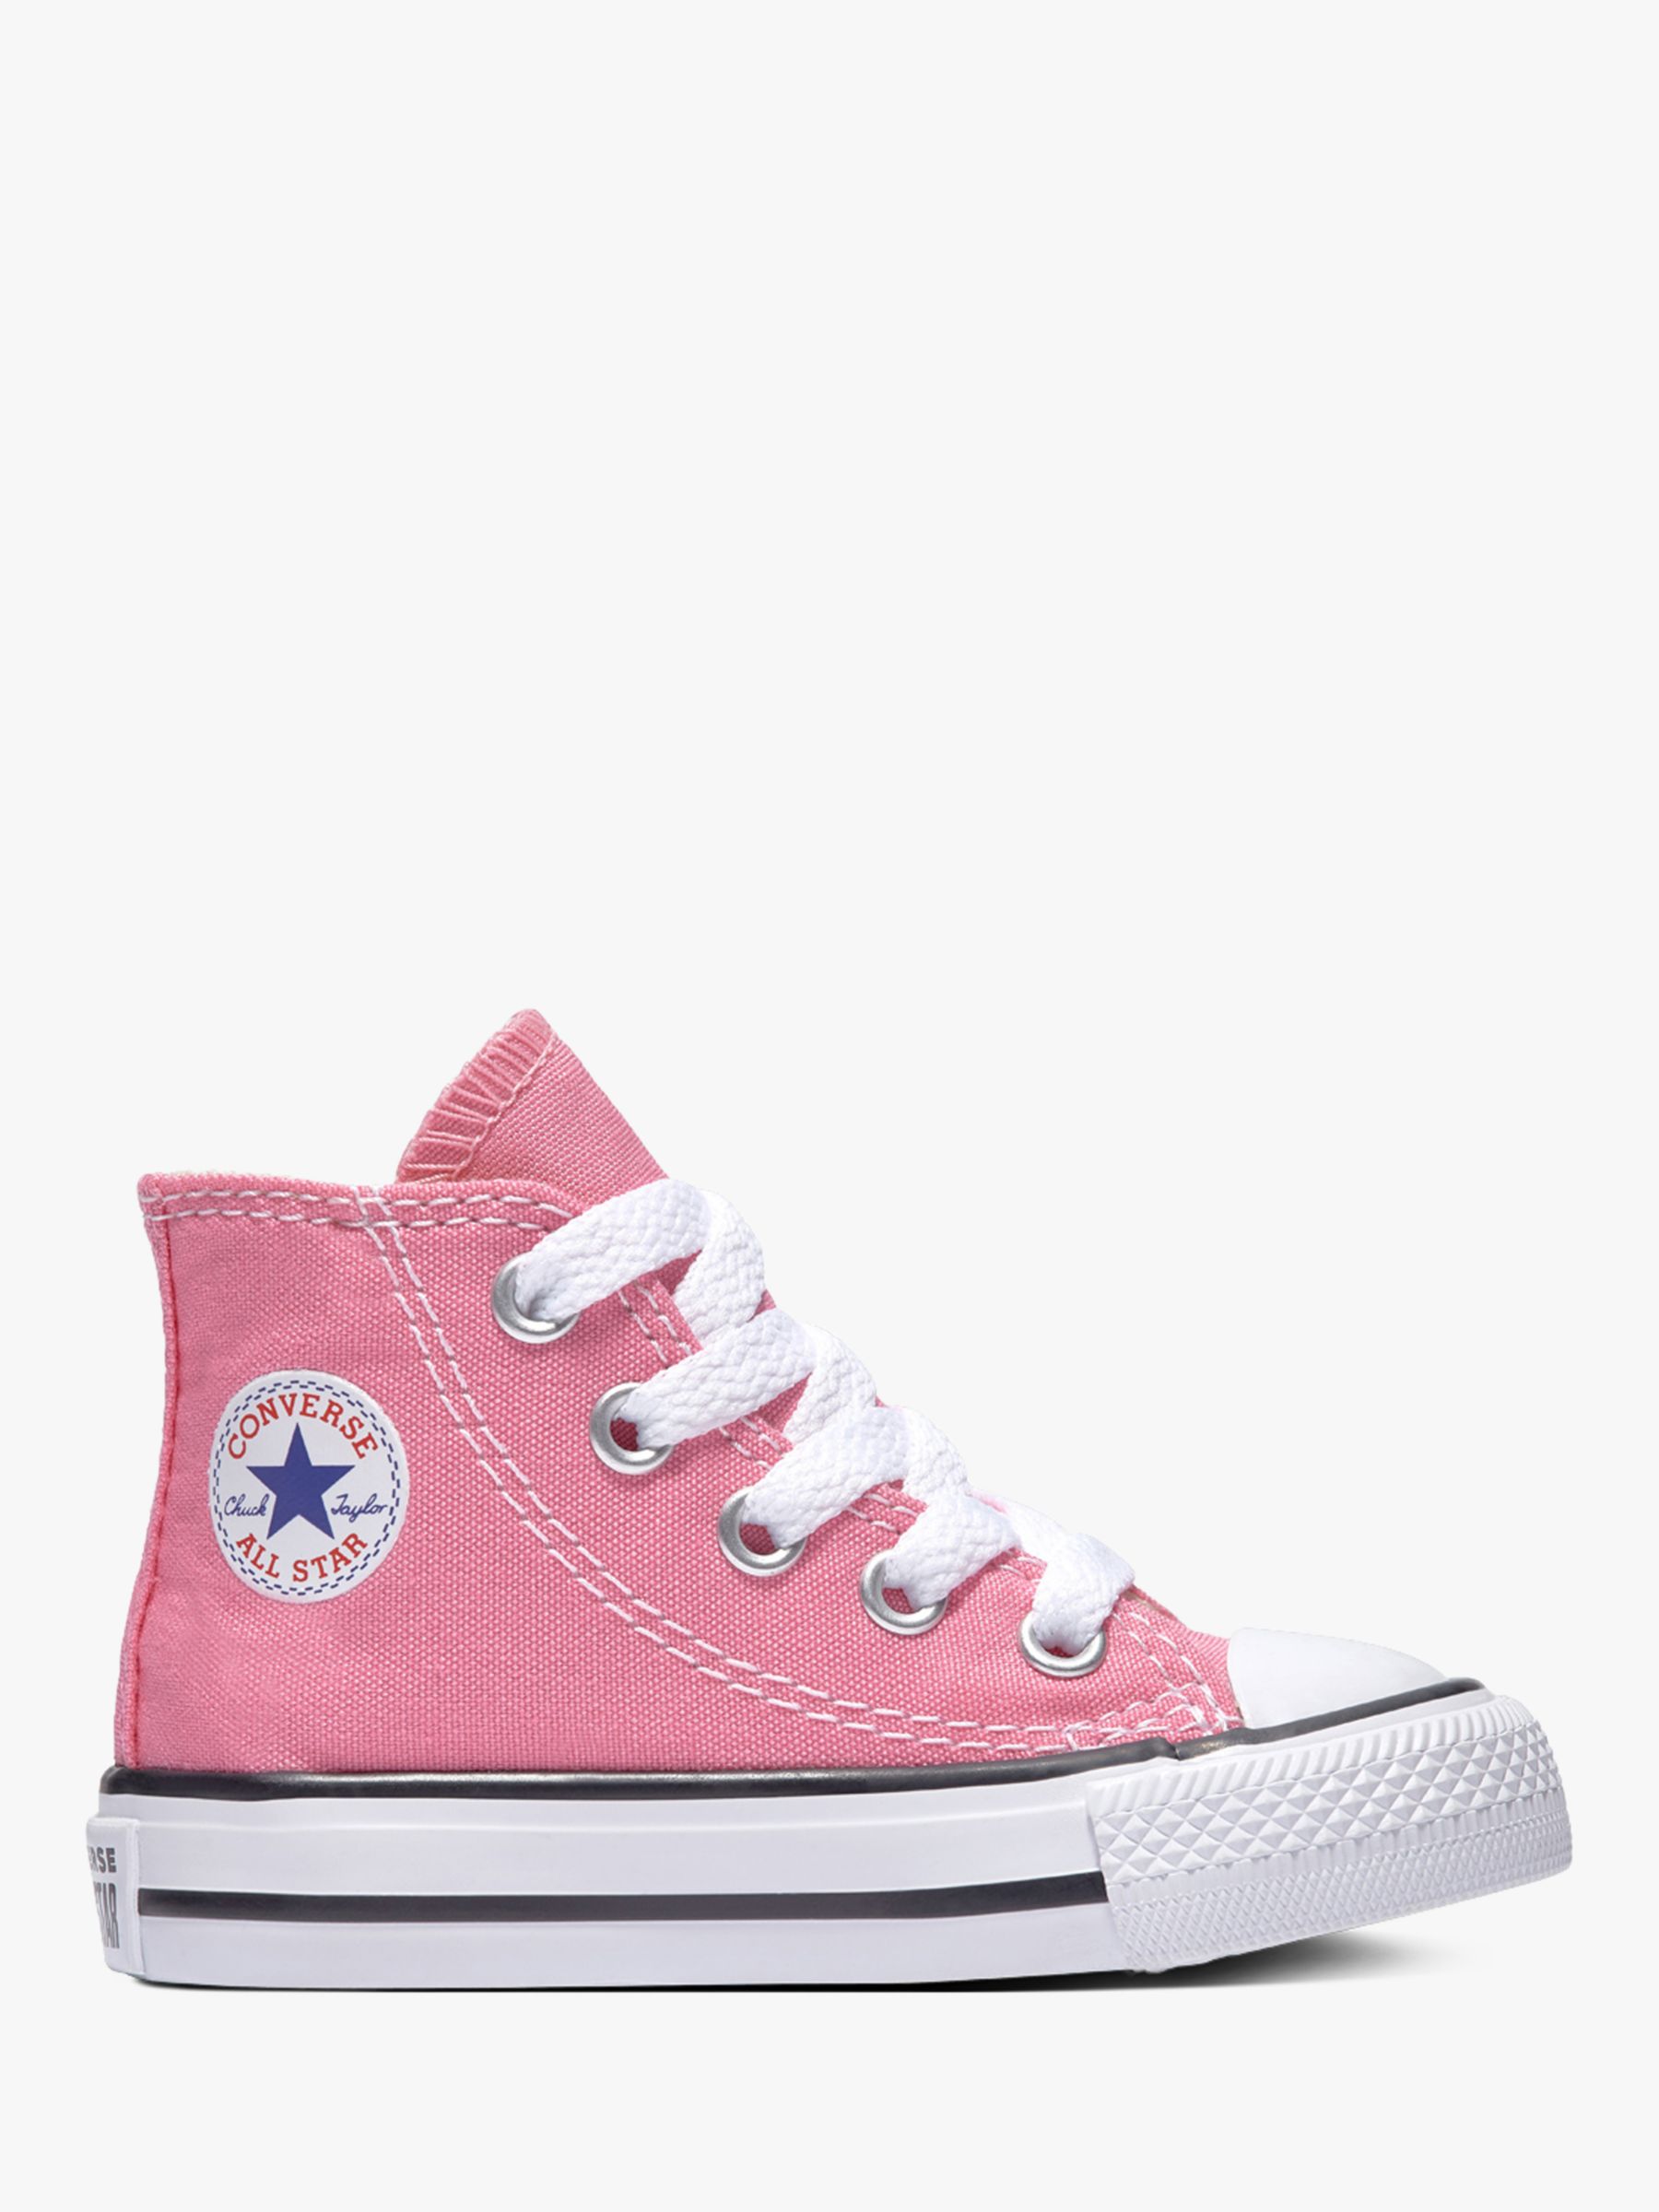 Converse All Star Core-Hi Trainers, Pink, Size 11 Junior